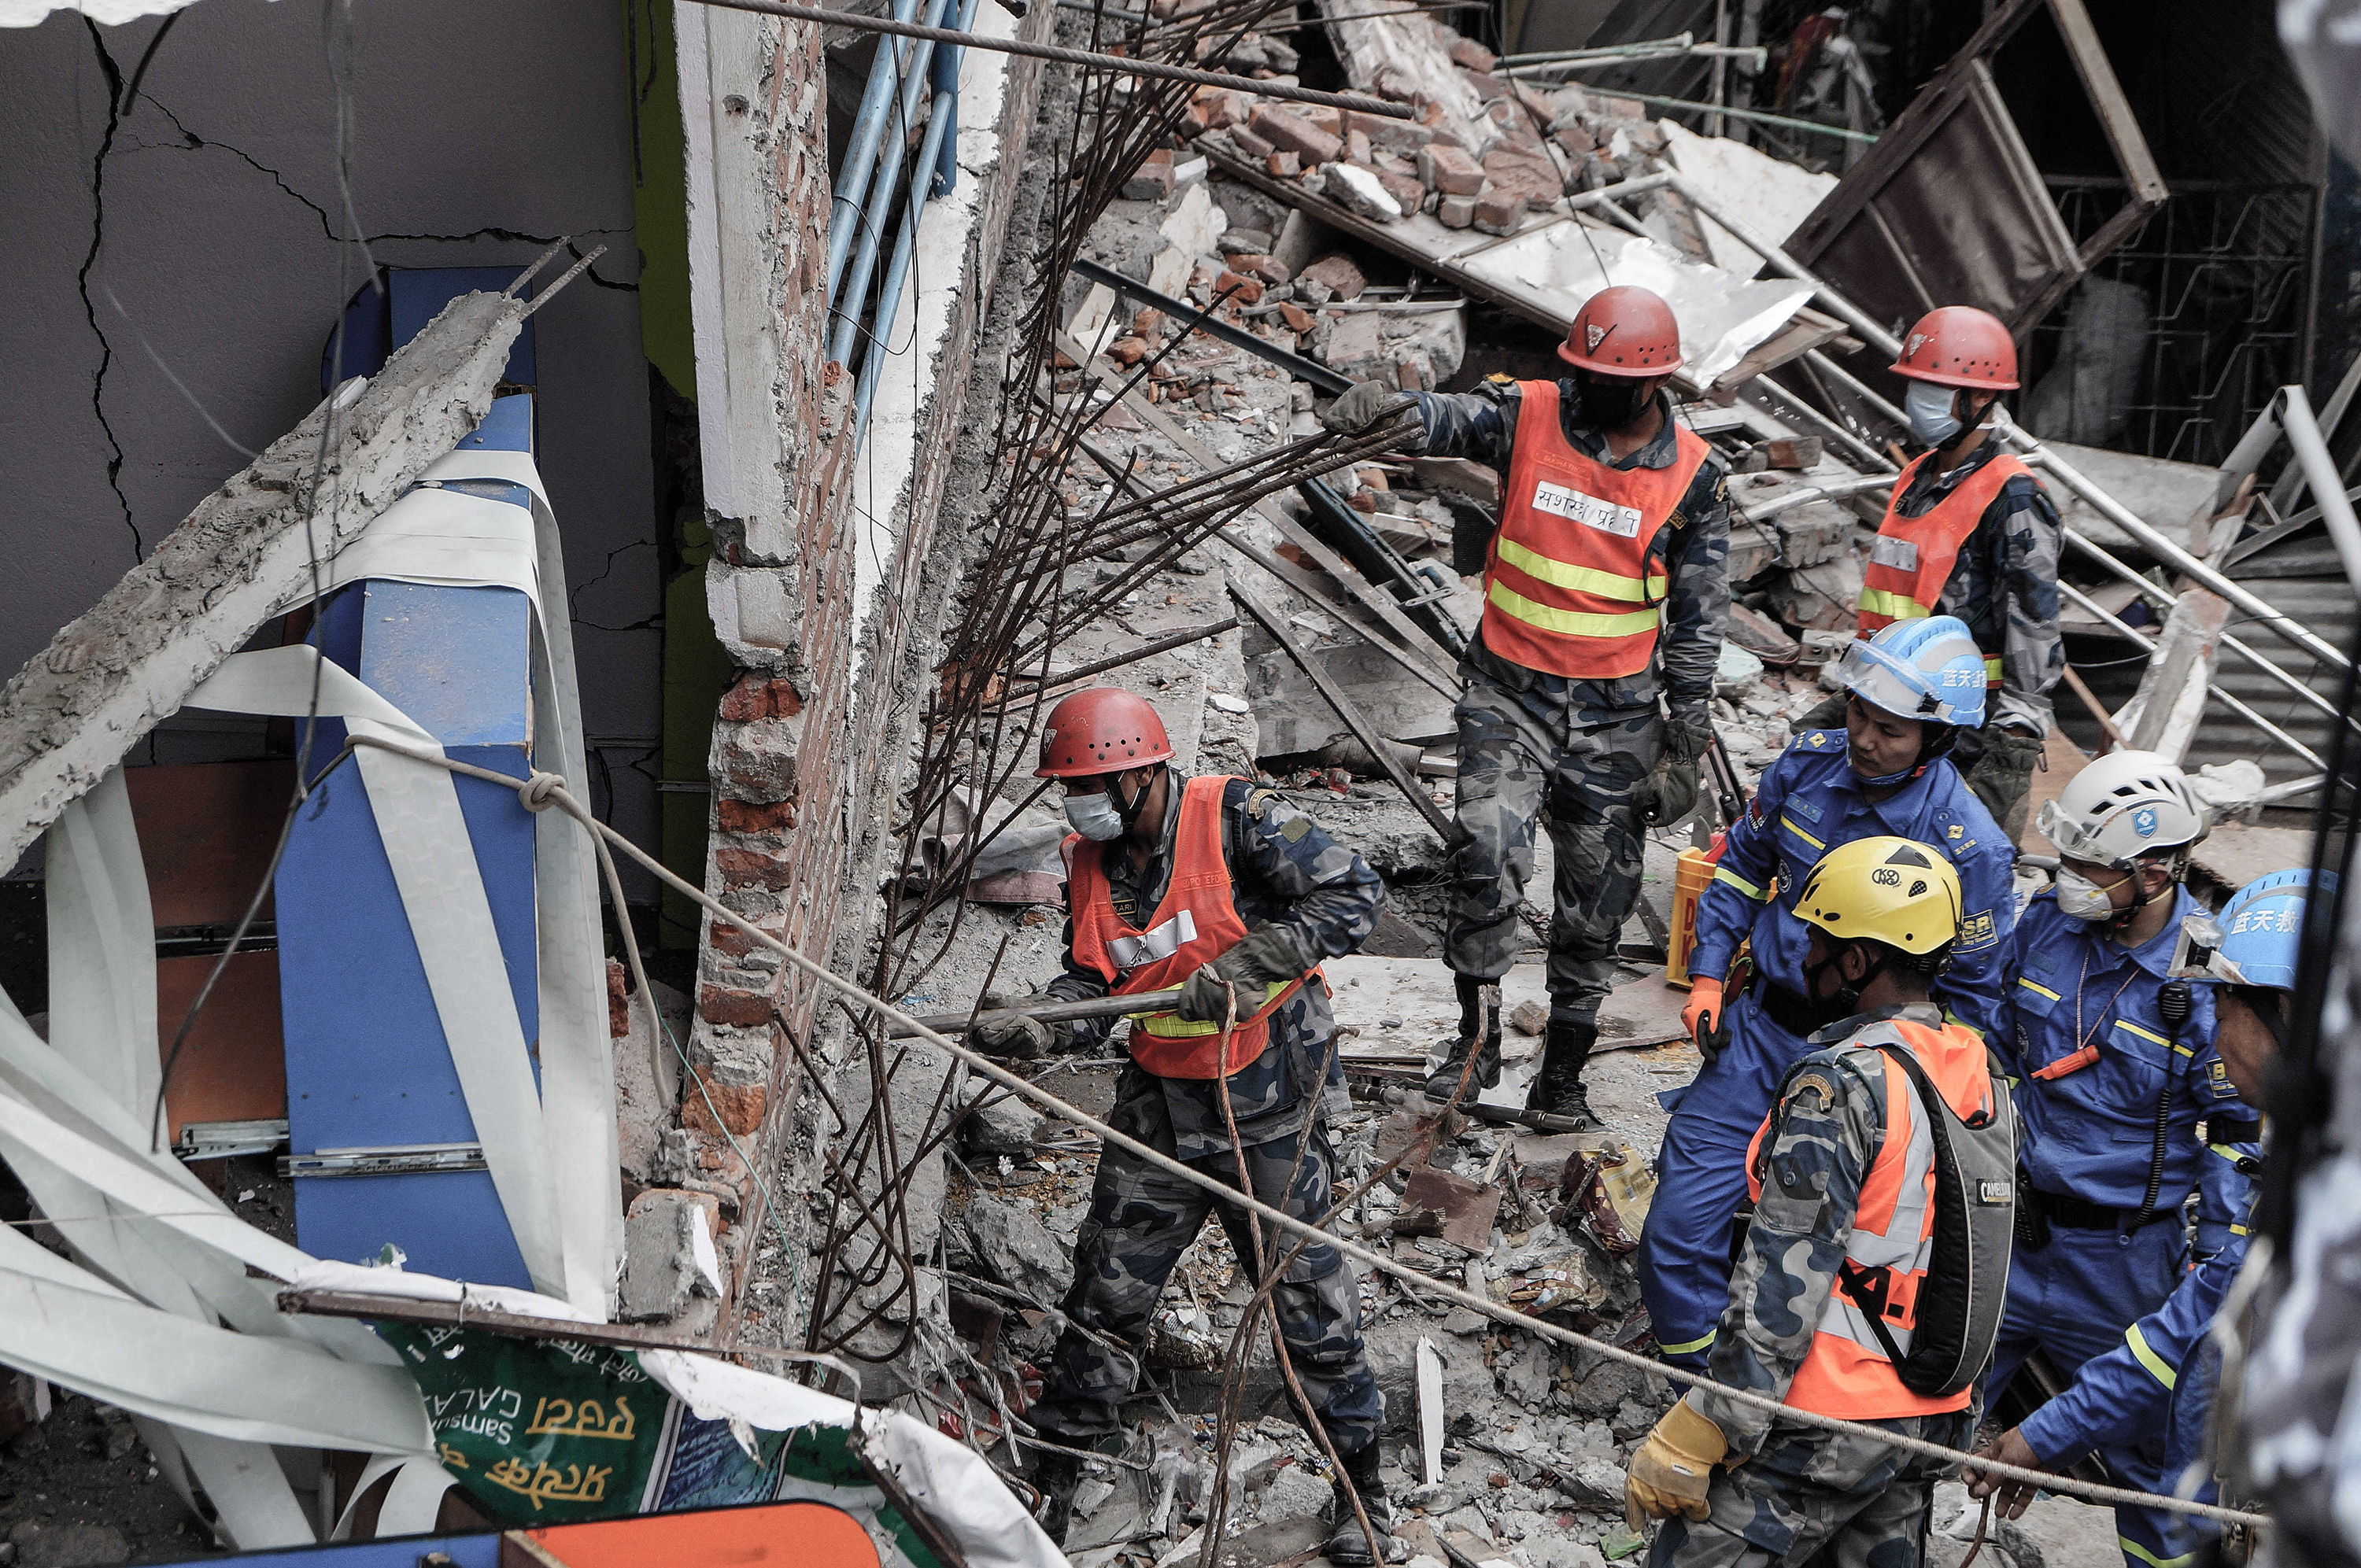 Nepalese rescue personnel search for the bodies of earthquake victims in Kathmandu, Nepal, on Tuesday, April 28, 2015. (Sunil Pradhan/NurPhoto/Zuma Press/TNS)